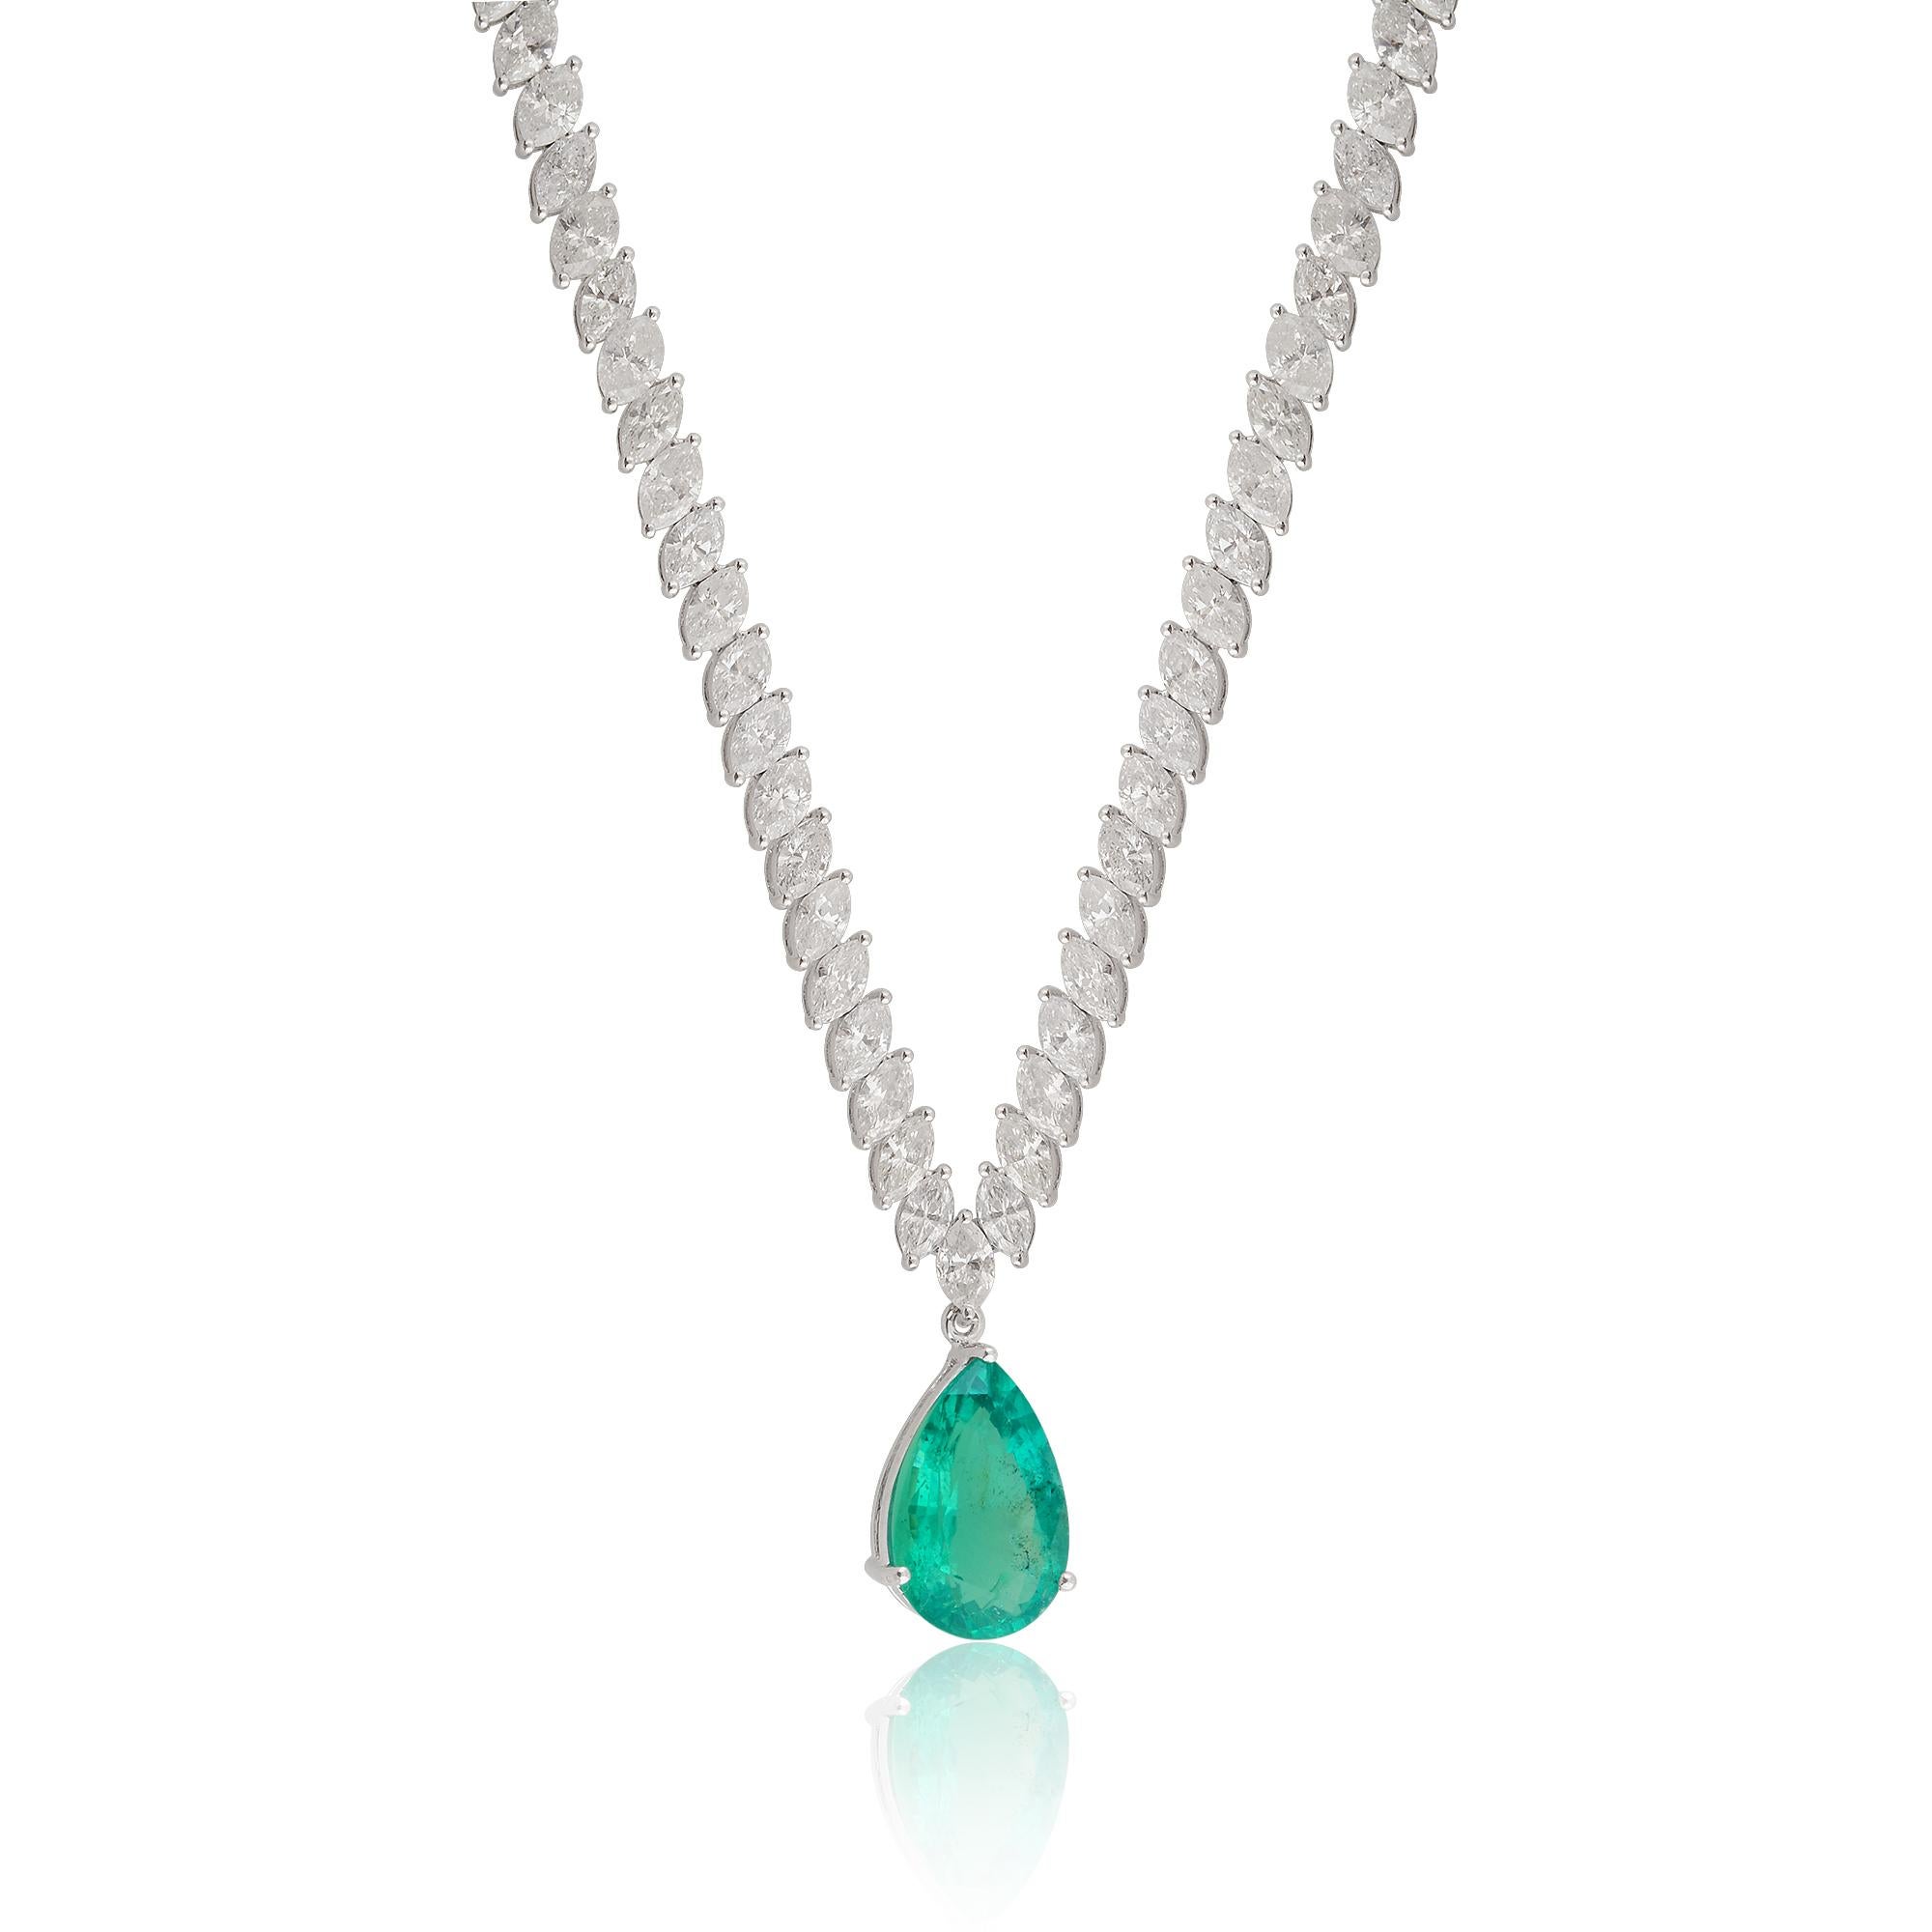 A charm necklace featuring a pear-shaped Zambian emerald gemstone and diamonds in 14 karat white gold is a stunning and elegant piece of jewelry. The necklace typically features a single pear-shaped Zambian emerald as the centerpiece, surrounded by